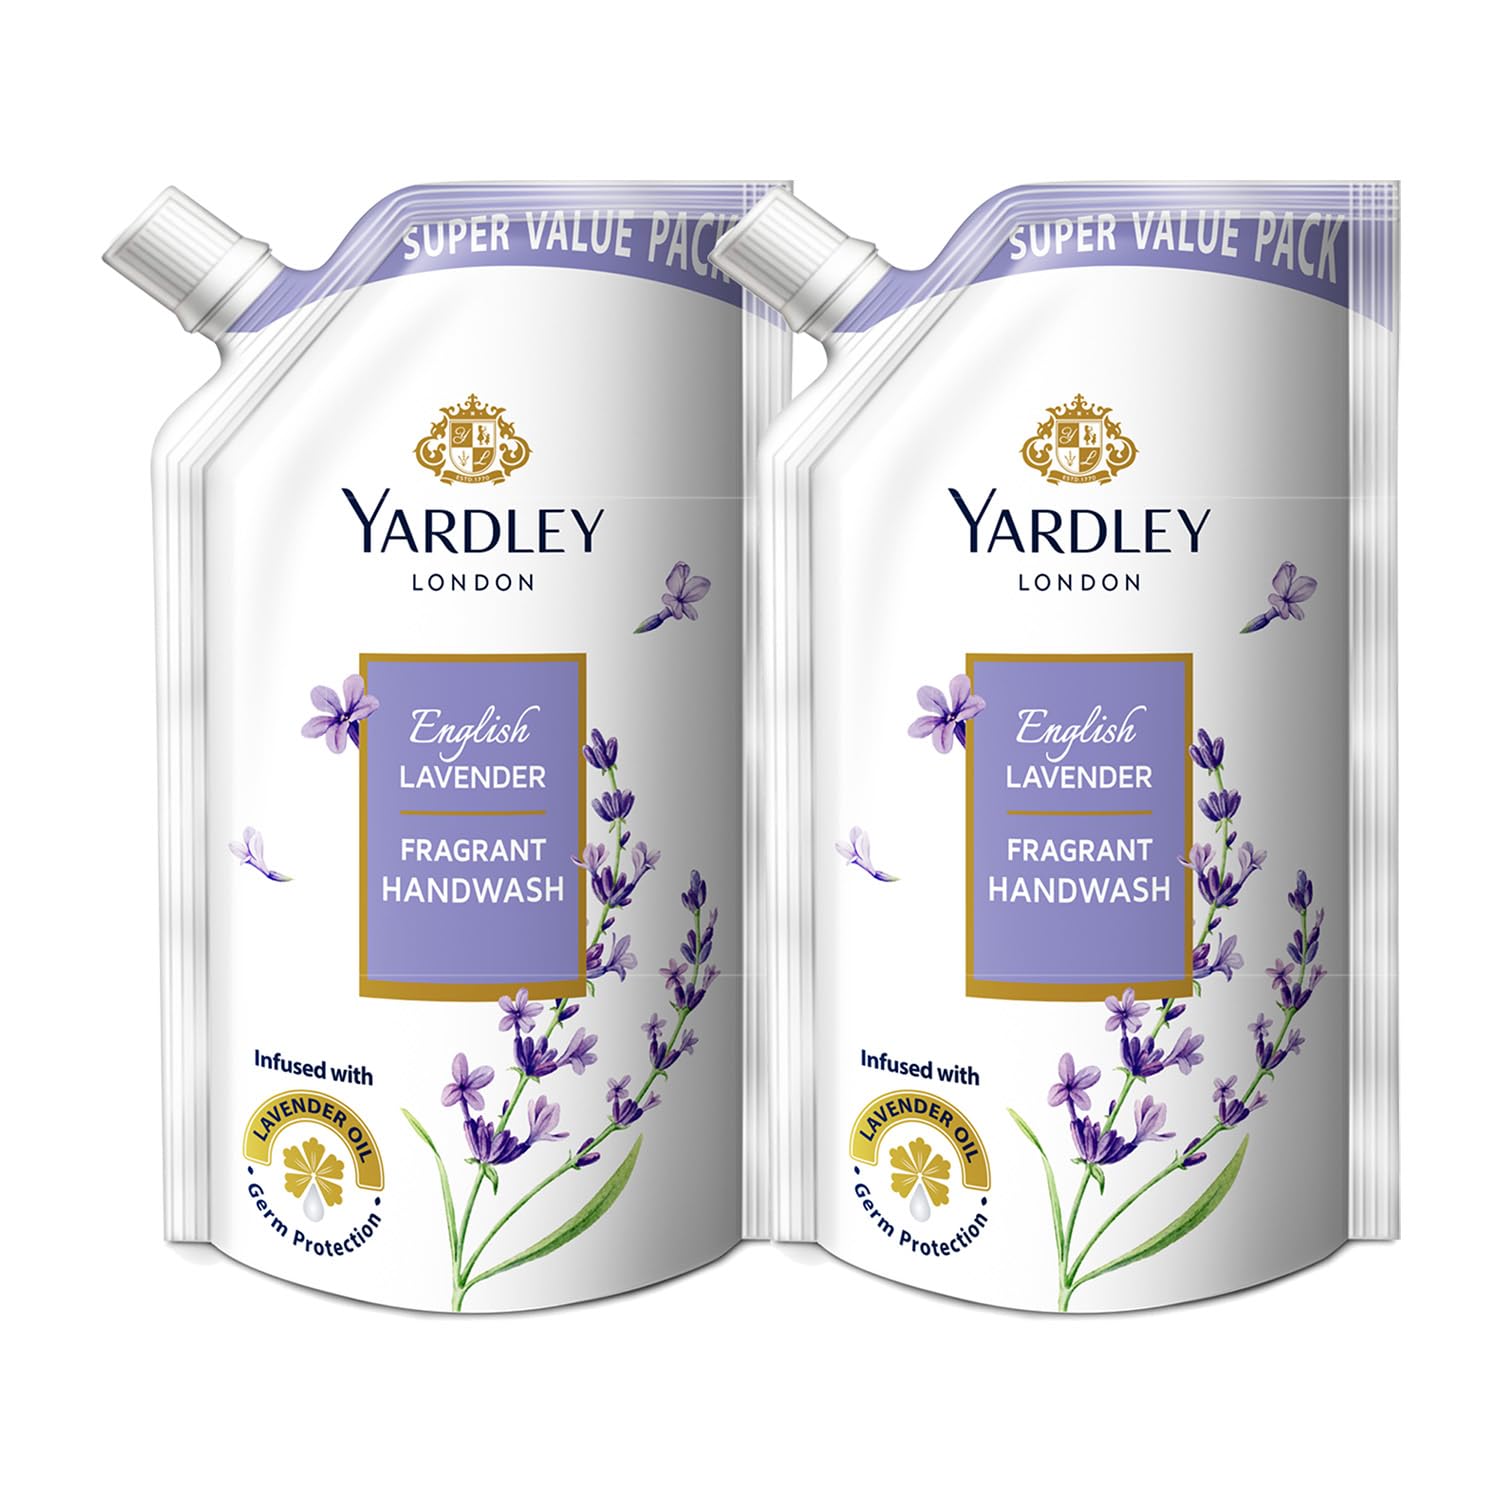 Yardley London English Lavender Fragrant Handwash |Infused with Pure Lavender Oil| Germ Protection| For Soft & Fragrant Skin| 725ml (Pack of 2)